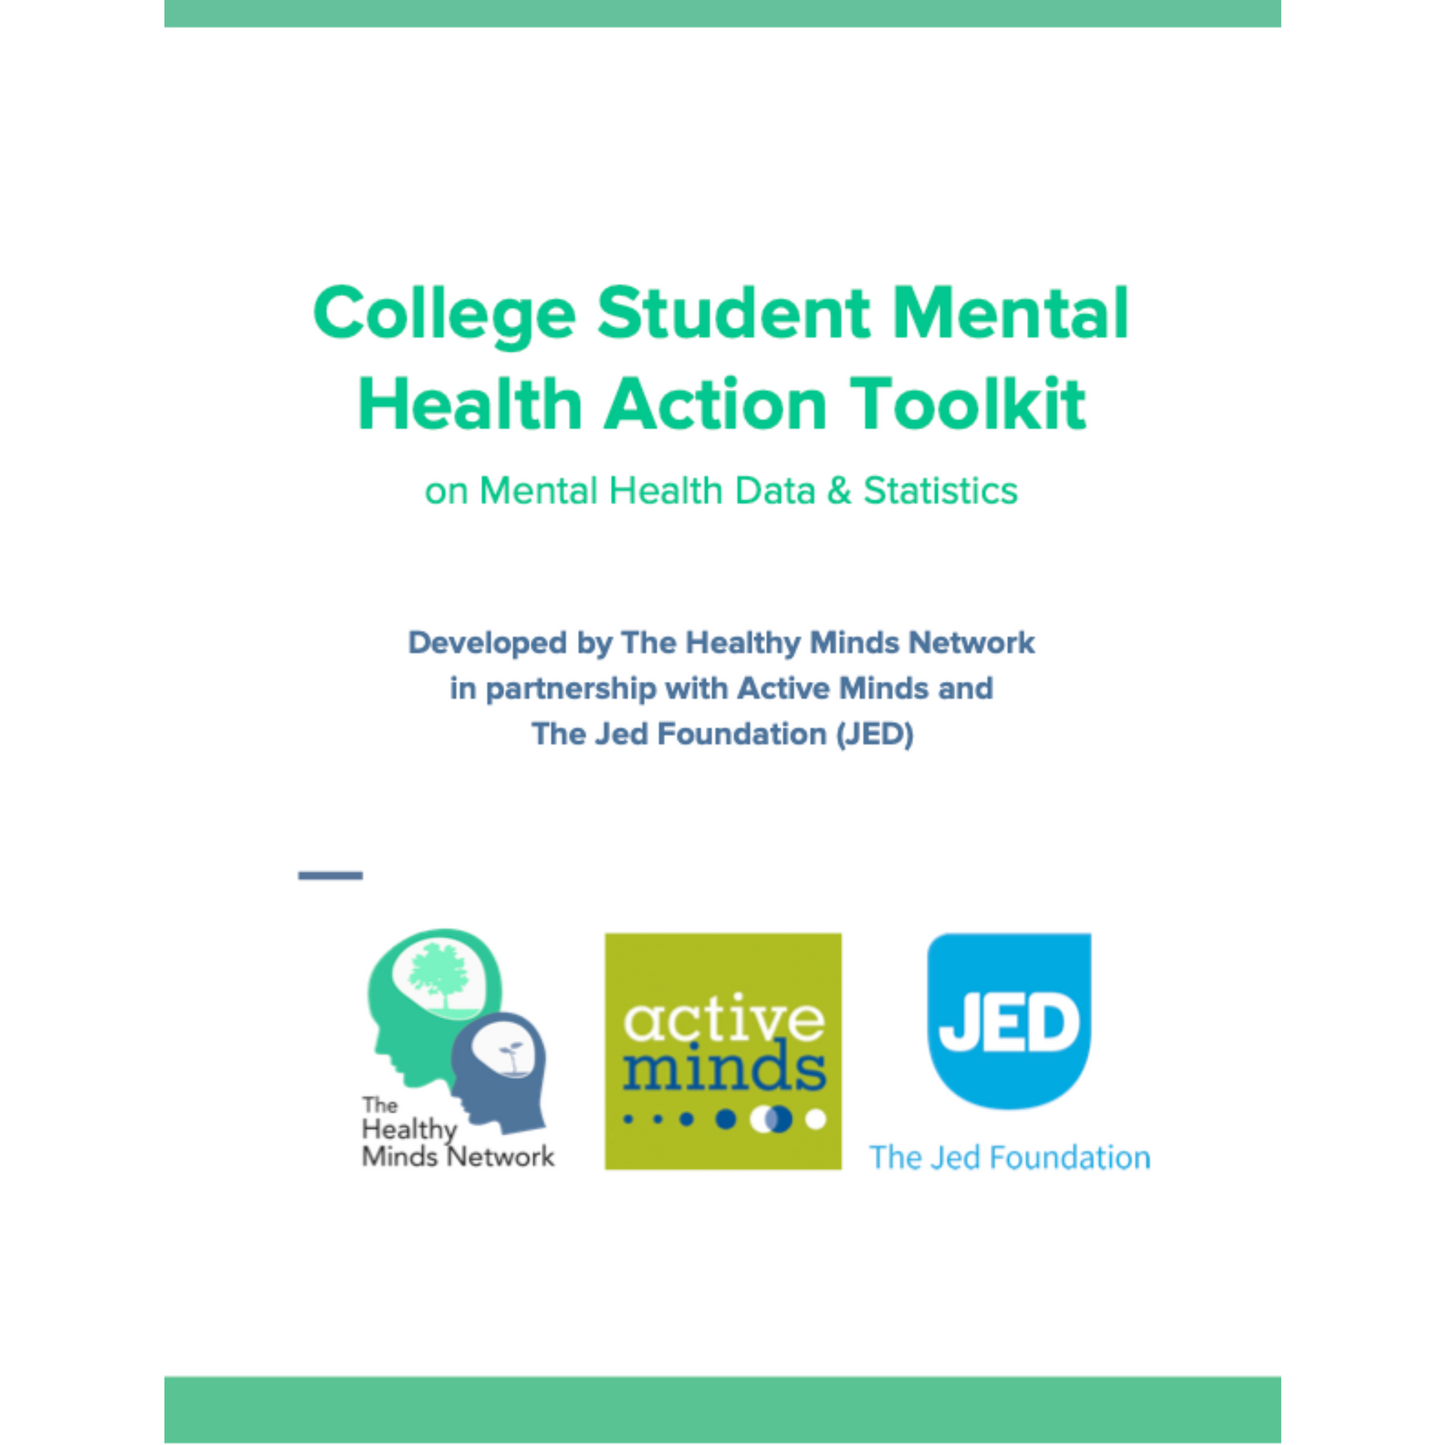 College Student Mental Health Action Toolkit